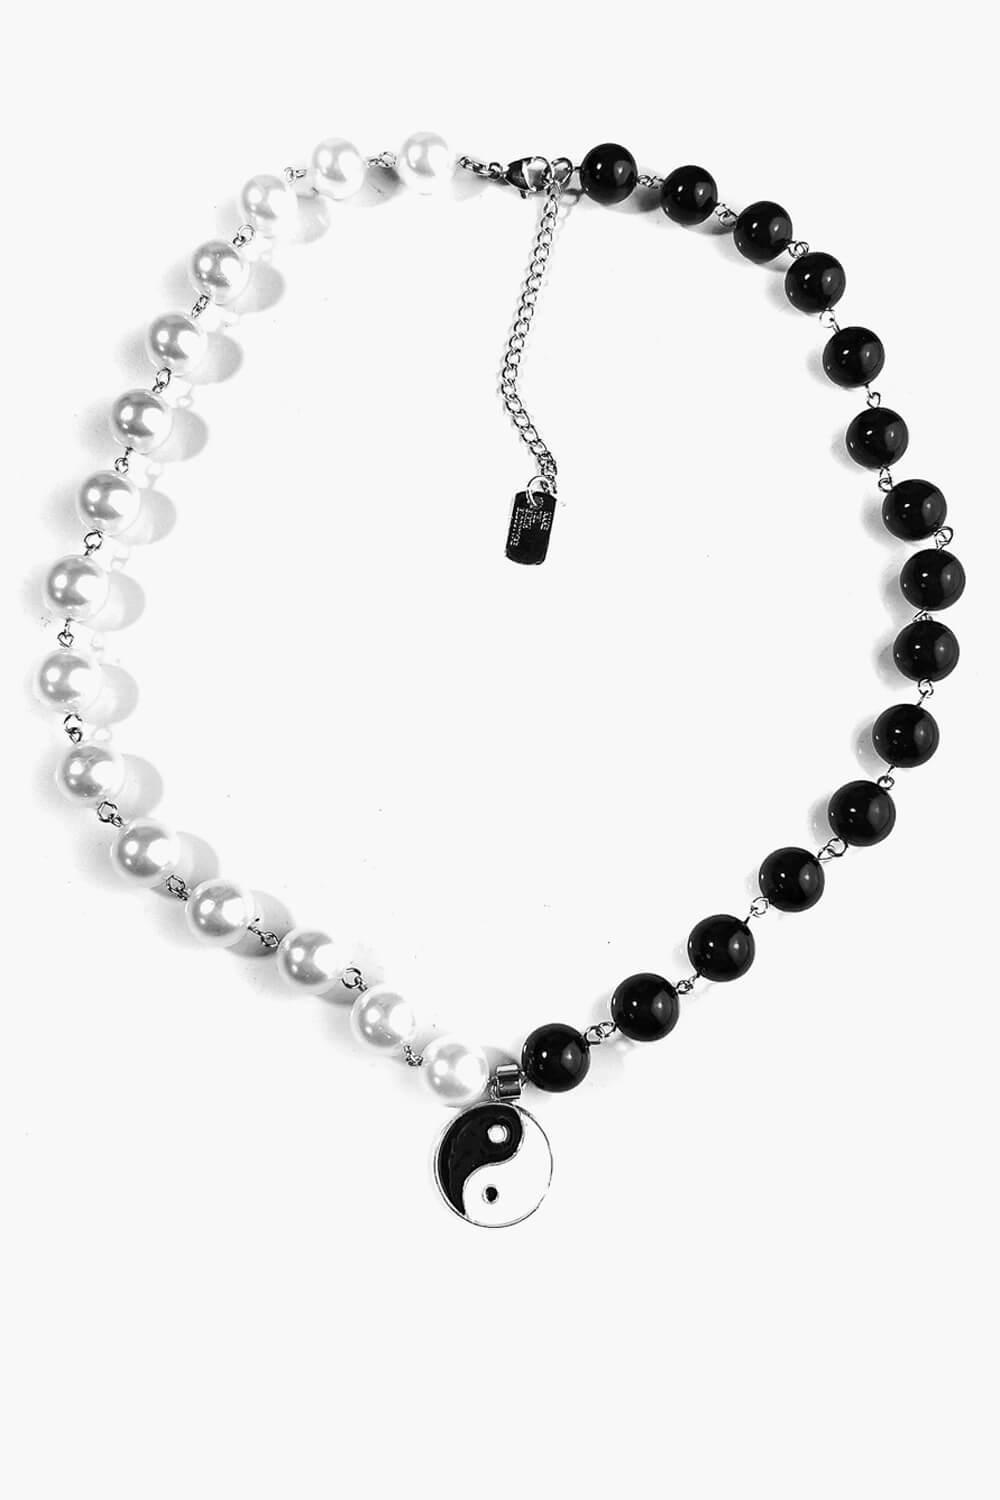 Ying Yang Necklace Black and White Beads - Aesthetic Shop